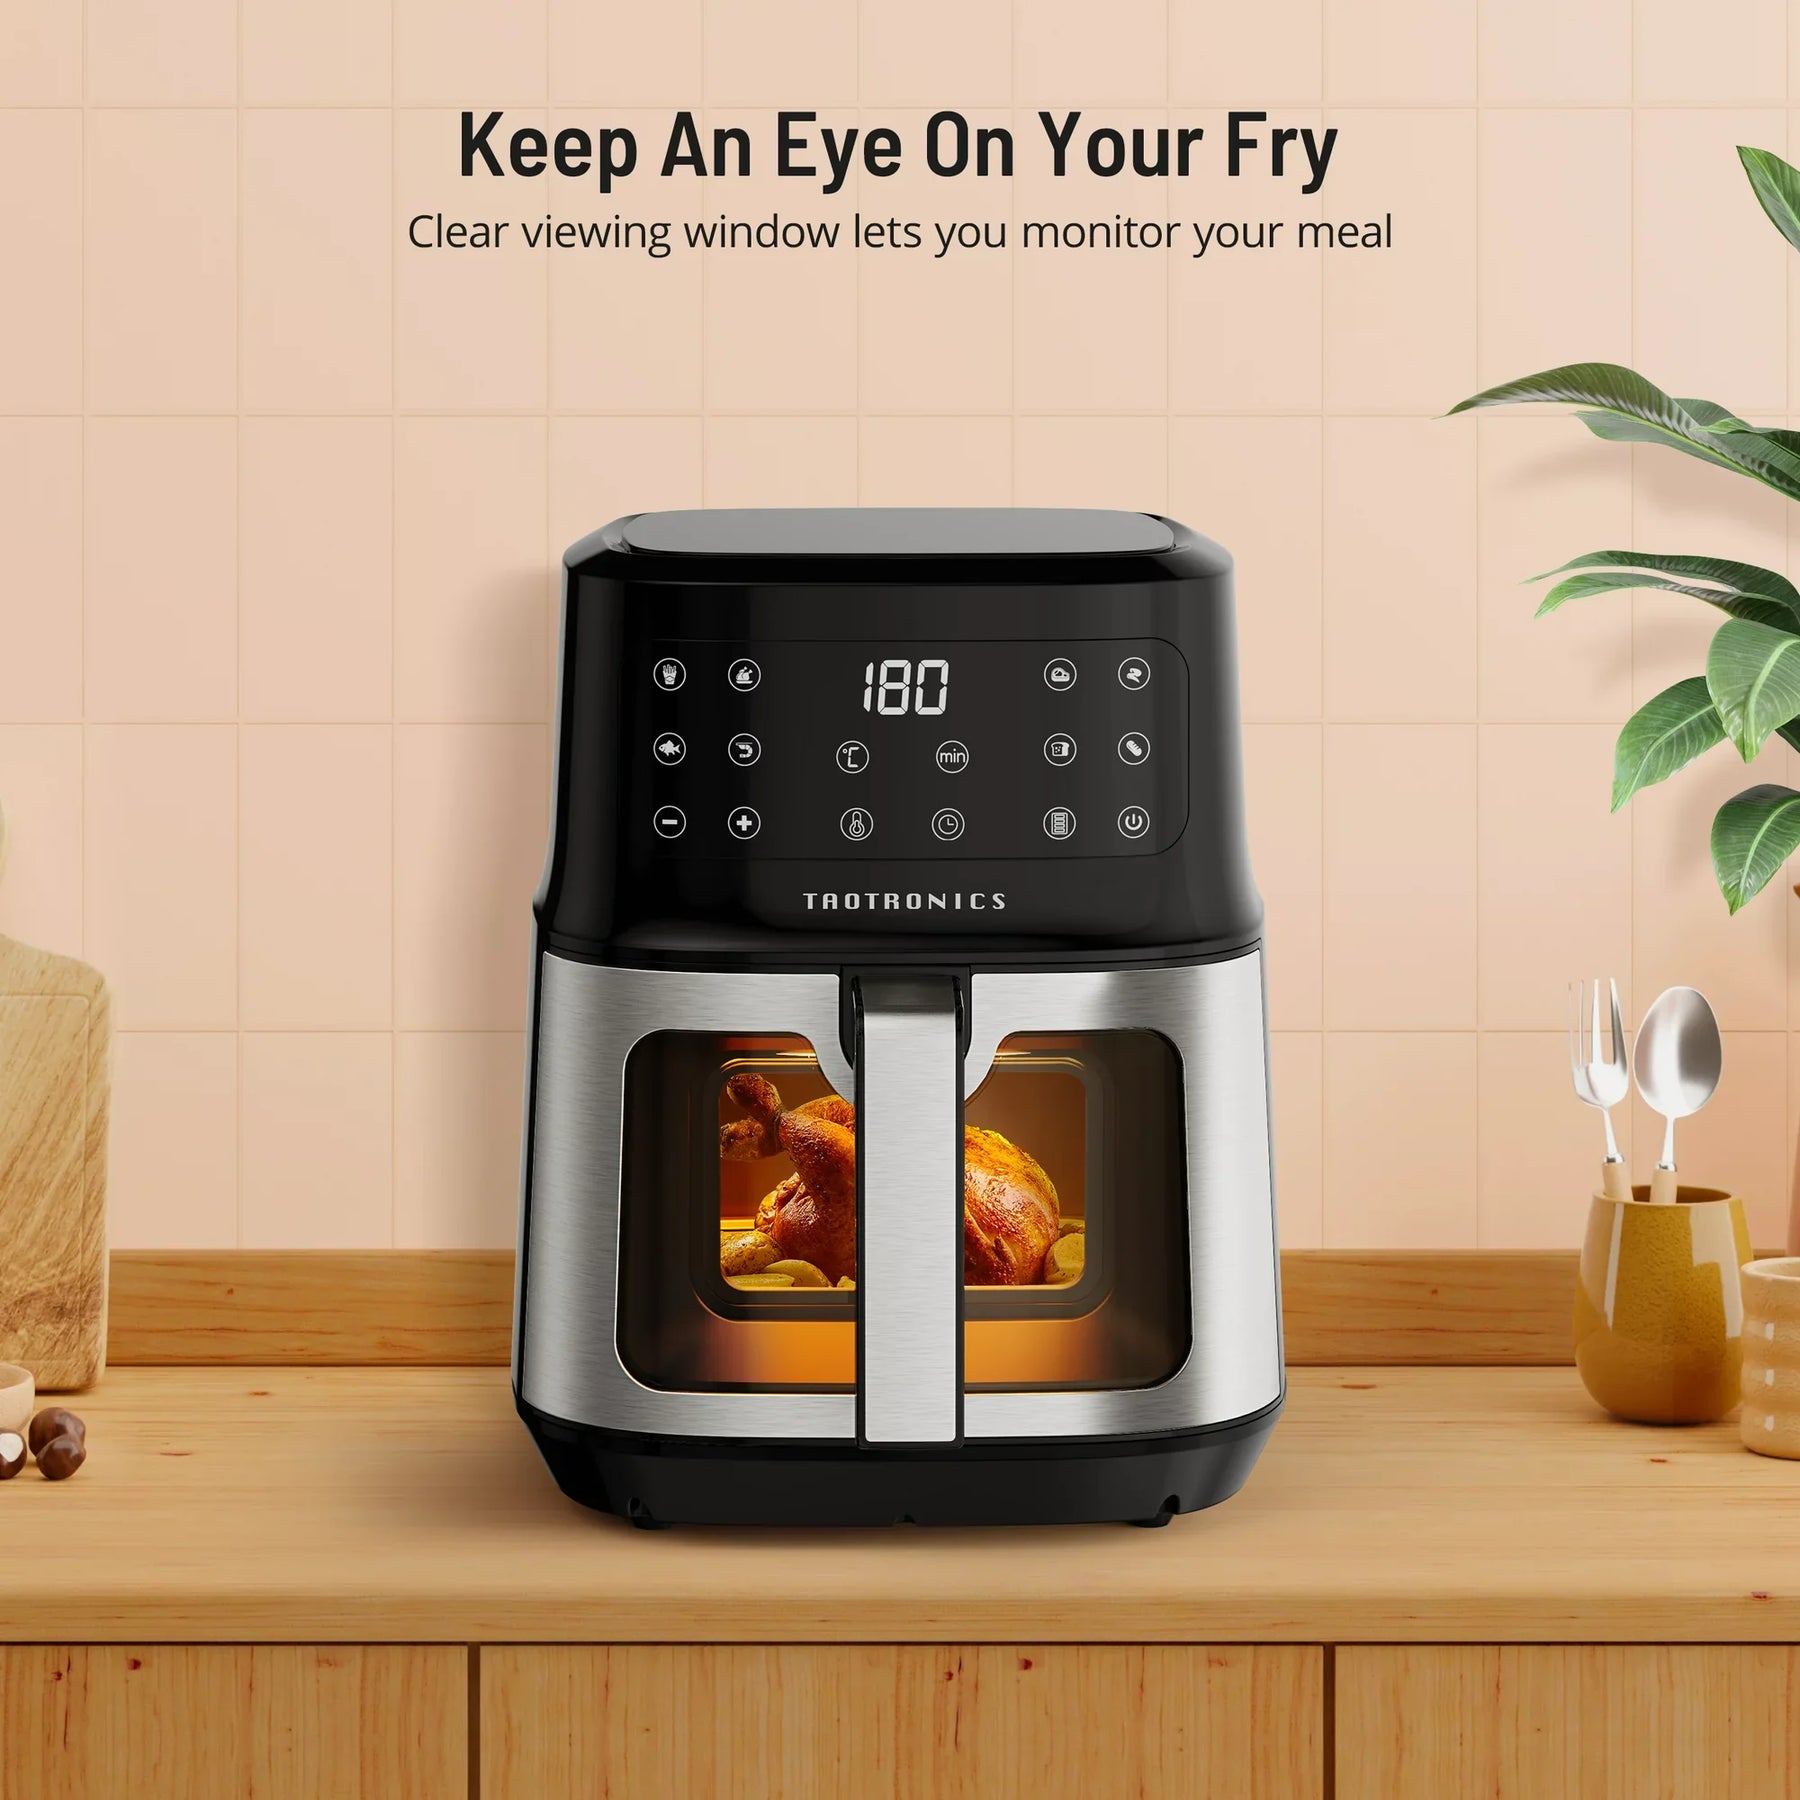 Xiaomi Smart Air Fryer review: A 'smarter' way to 'fry' those